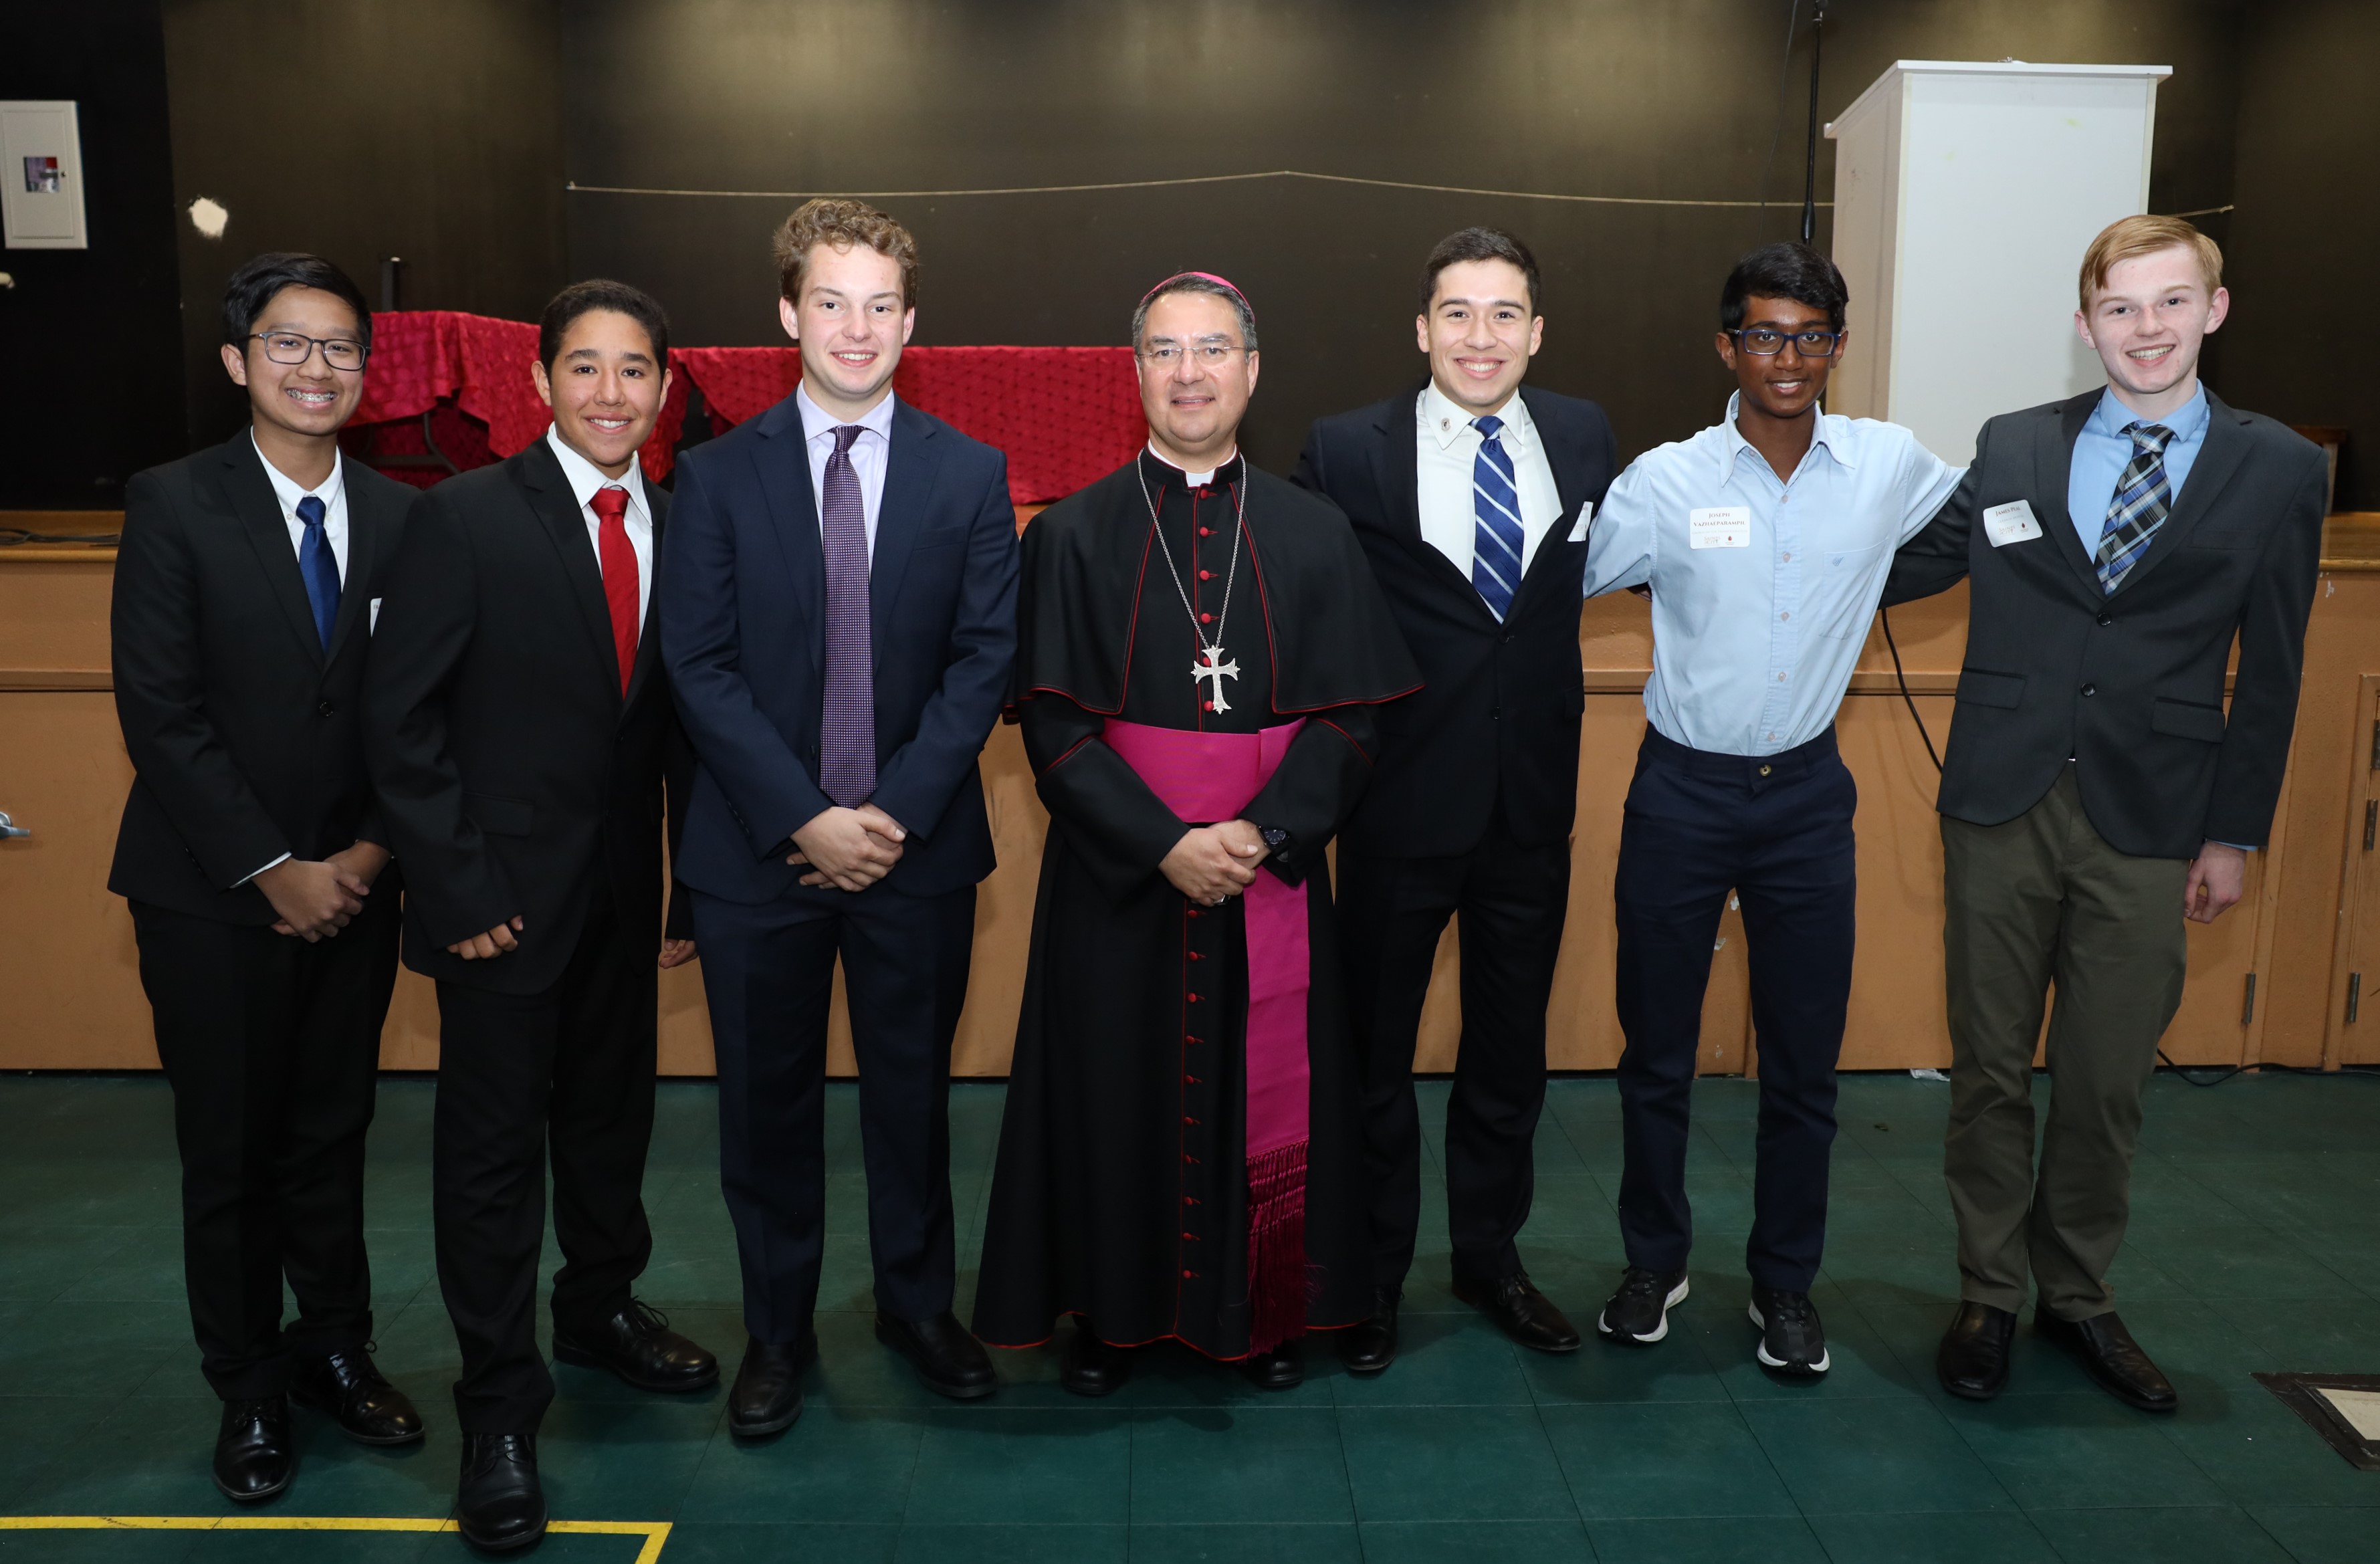 8th Annual Saints in the City Recognition Celebration